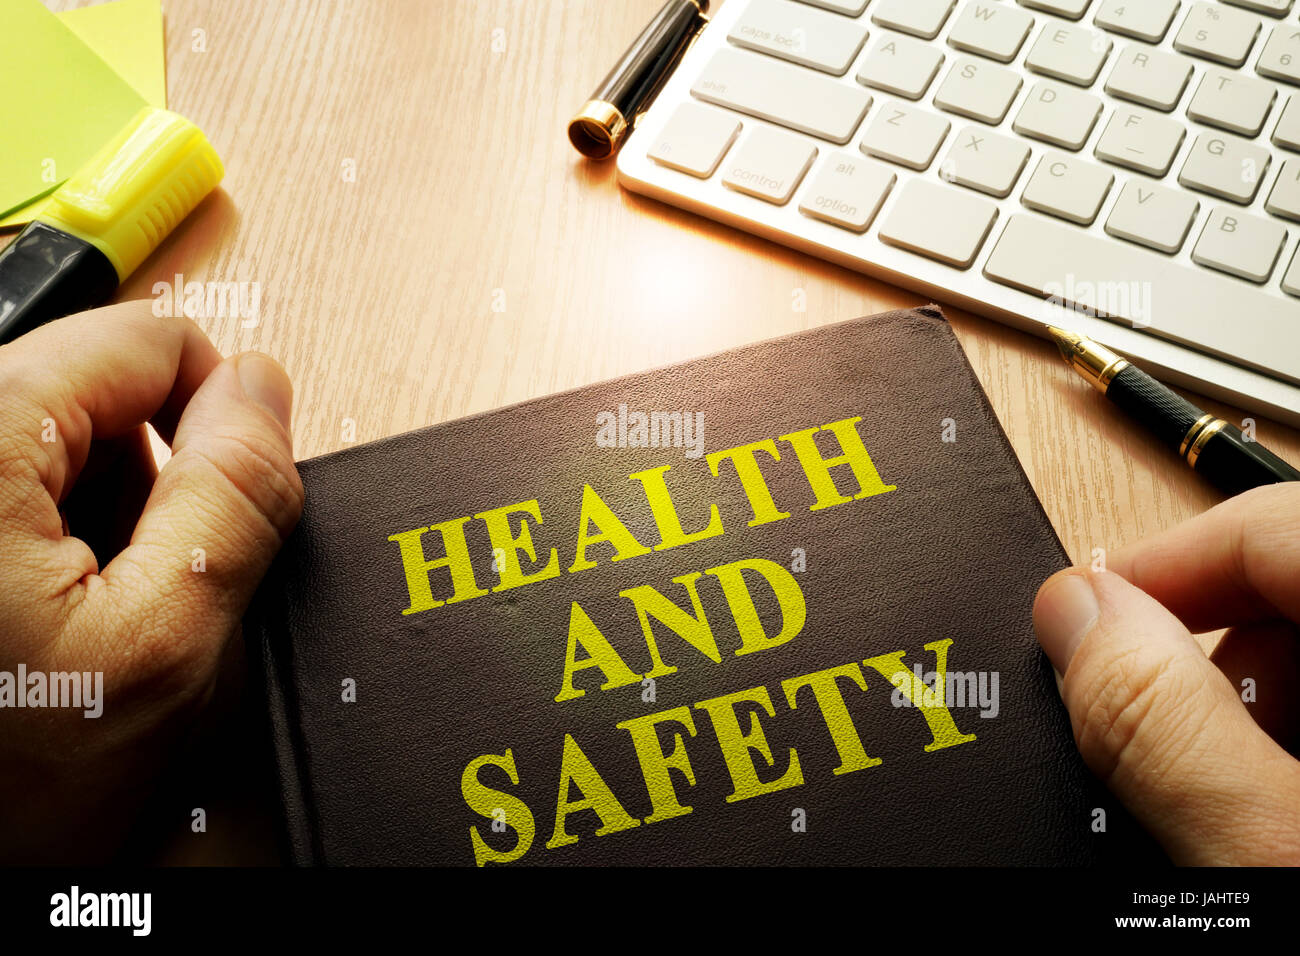 Hands holding documents with title health and safety. Stock Photo